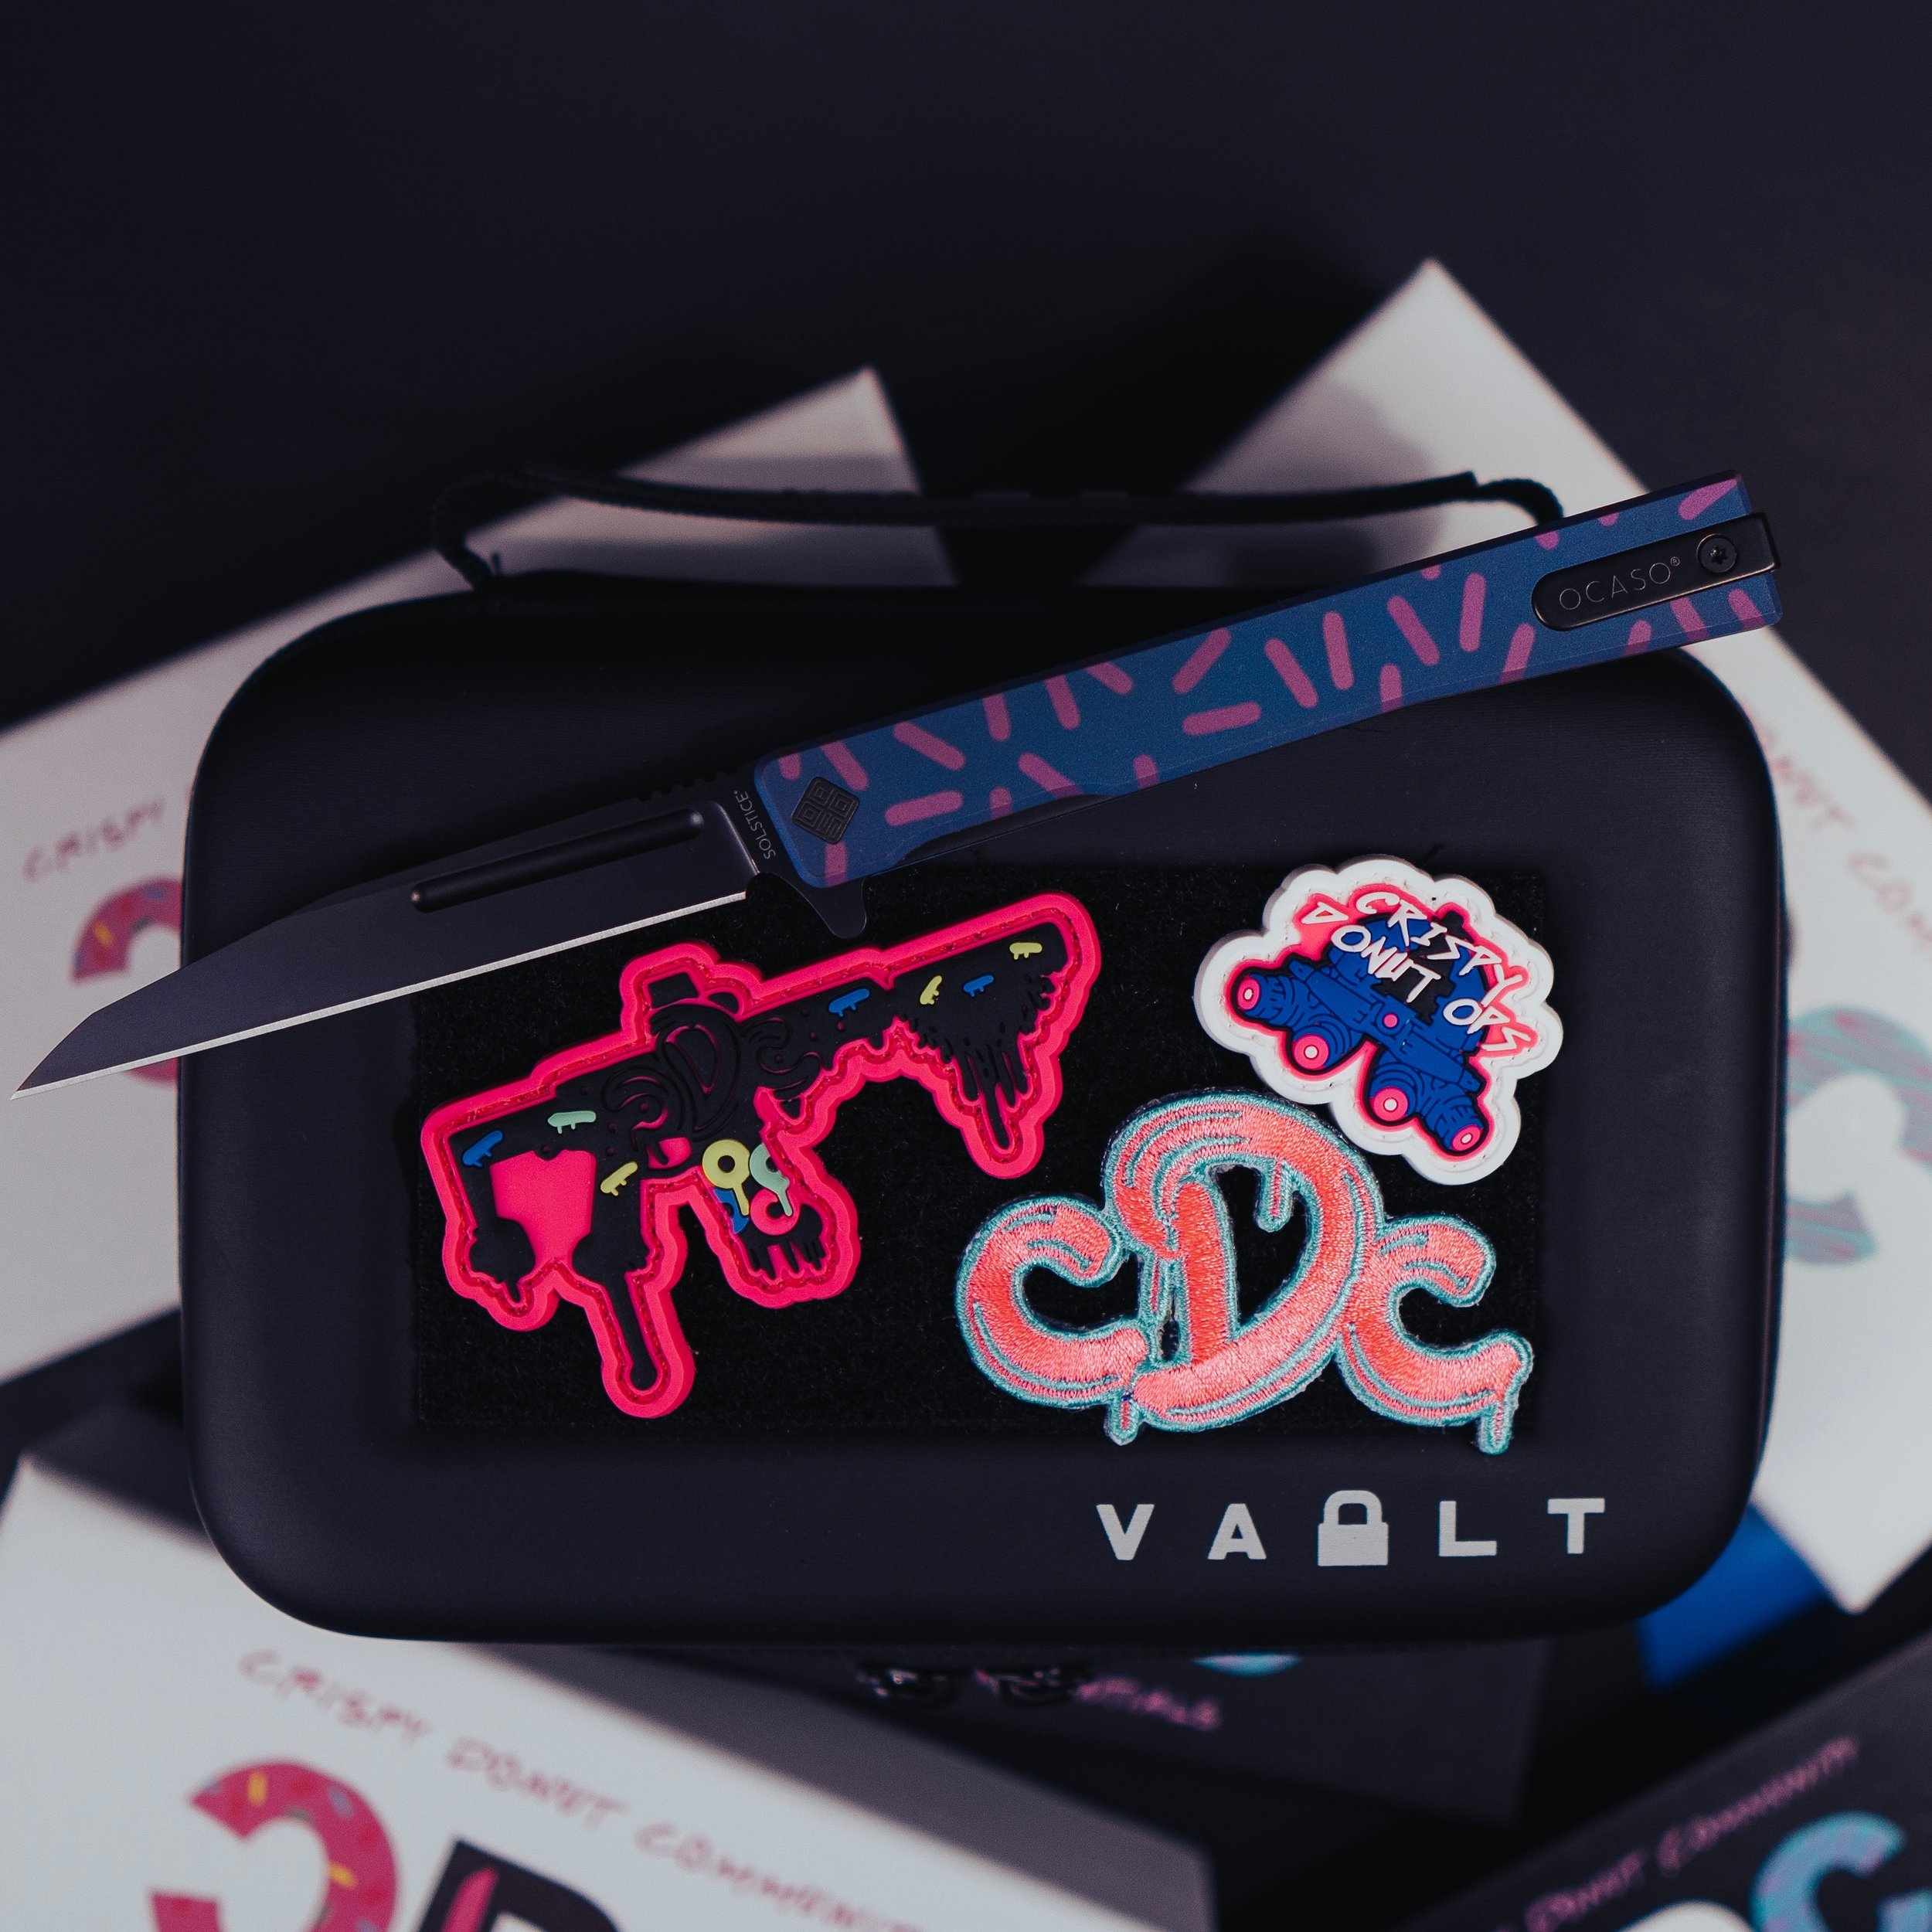 Join our monthly patch club today and get some SWEET EDC ESSENTIALS with our amazing patches. 

www.DONUTKNIFE.com

#patch #patchgame #edc #cdc #cdcedc #essential #fun #jvke #classy #gear #vip #exclusive #sweet #club #donuts #solstice #faver #goodthi